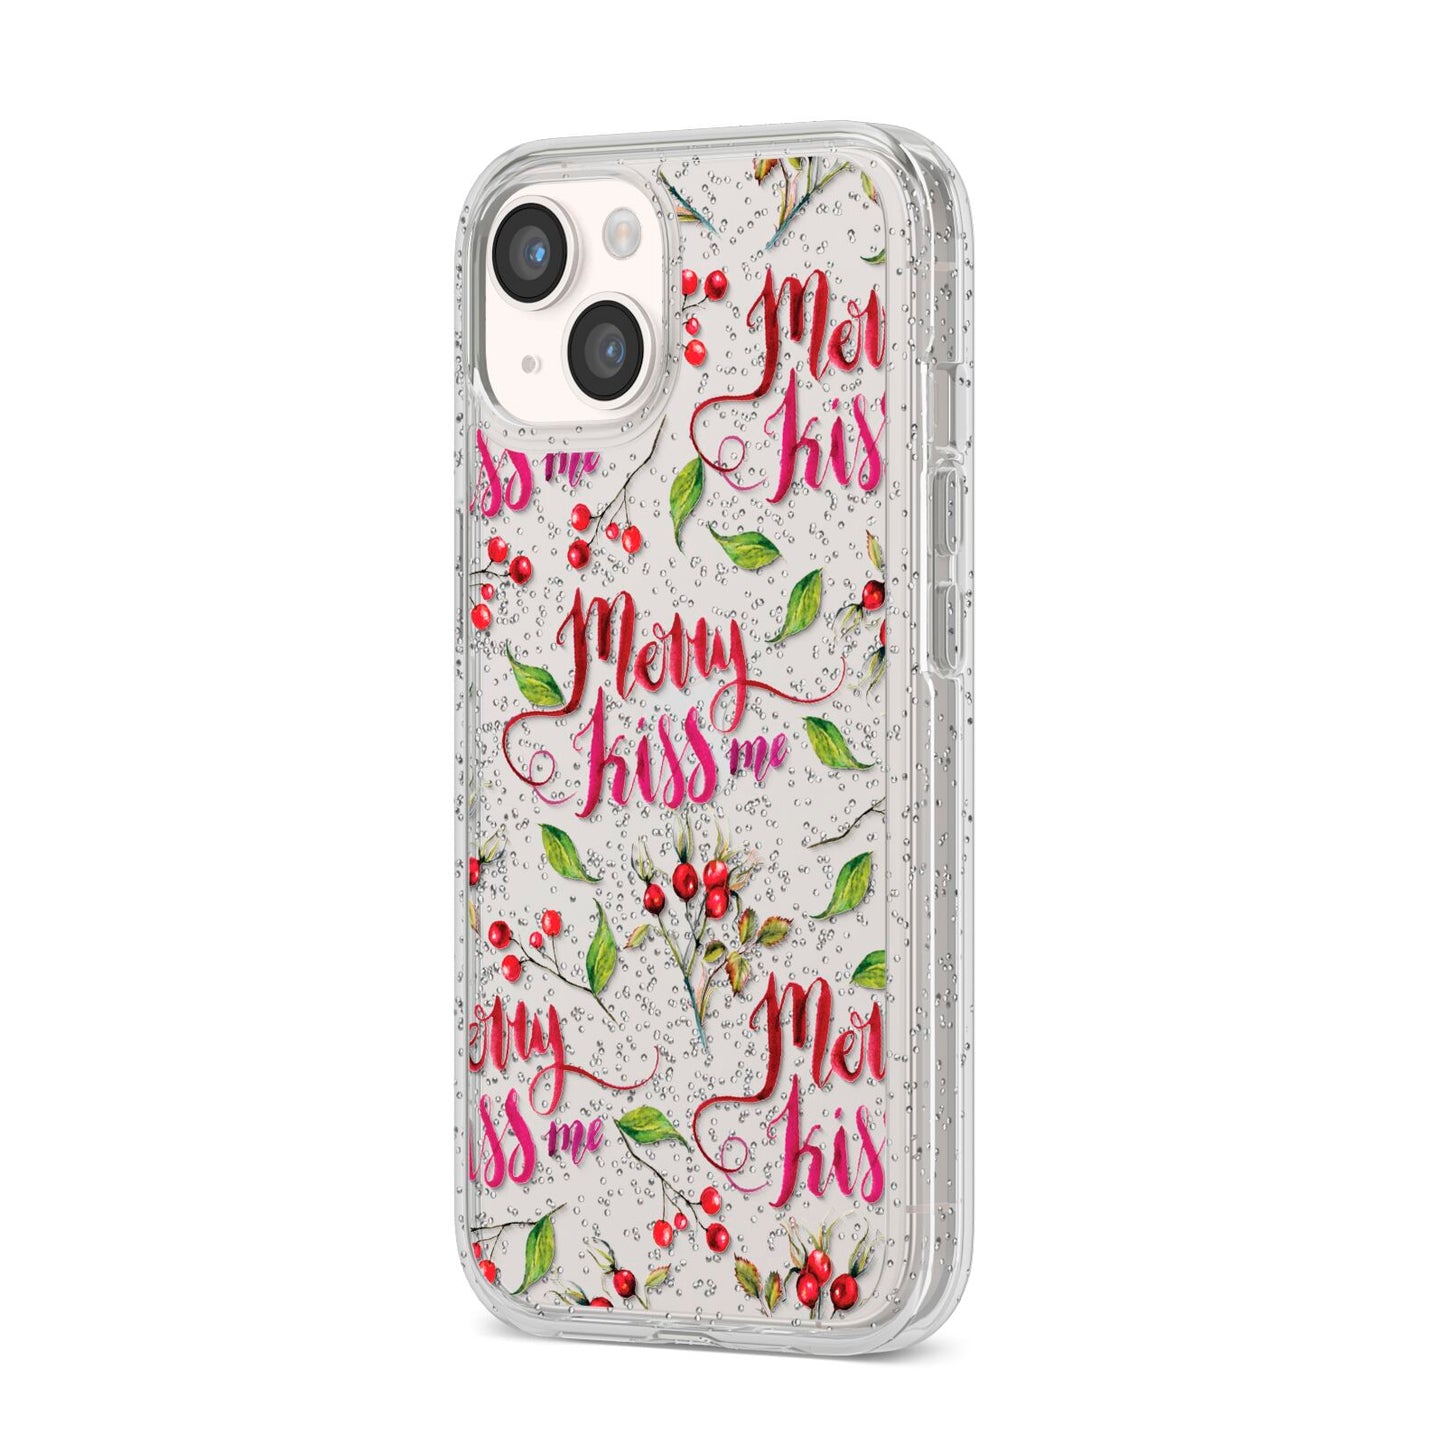 Merry kiss me iPhone 14 Glitter Tough Case Starlight Angled Image